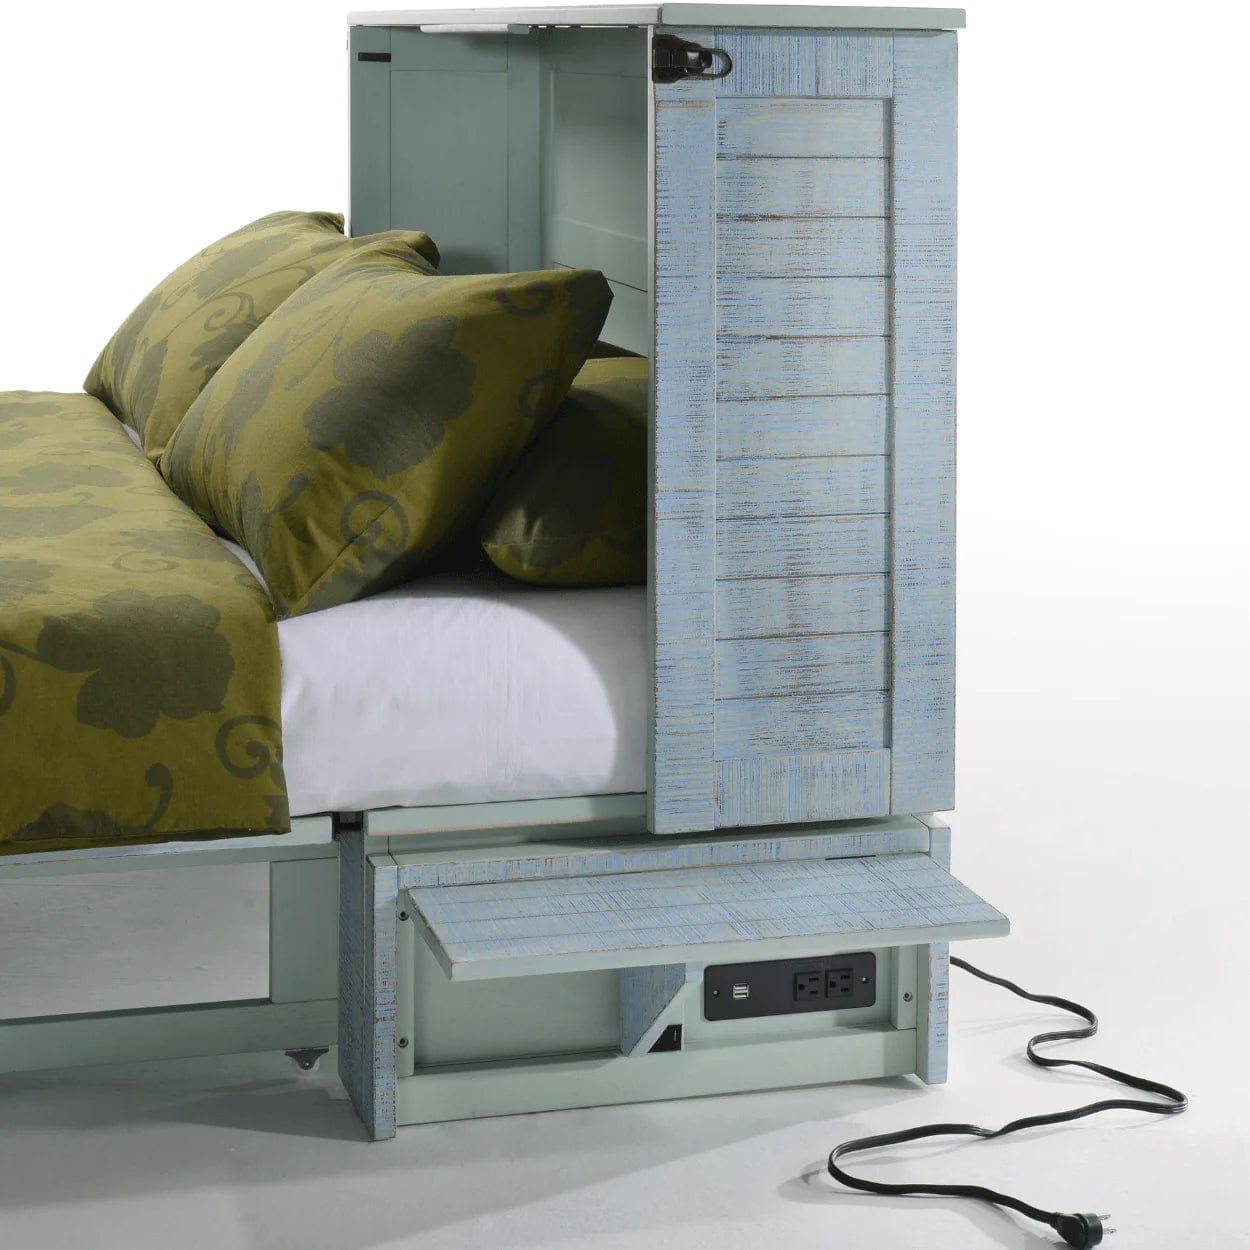 Night and Day Furniture Poppy Queen Murphy Cabinet Bed in Skye Finish with Mattress